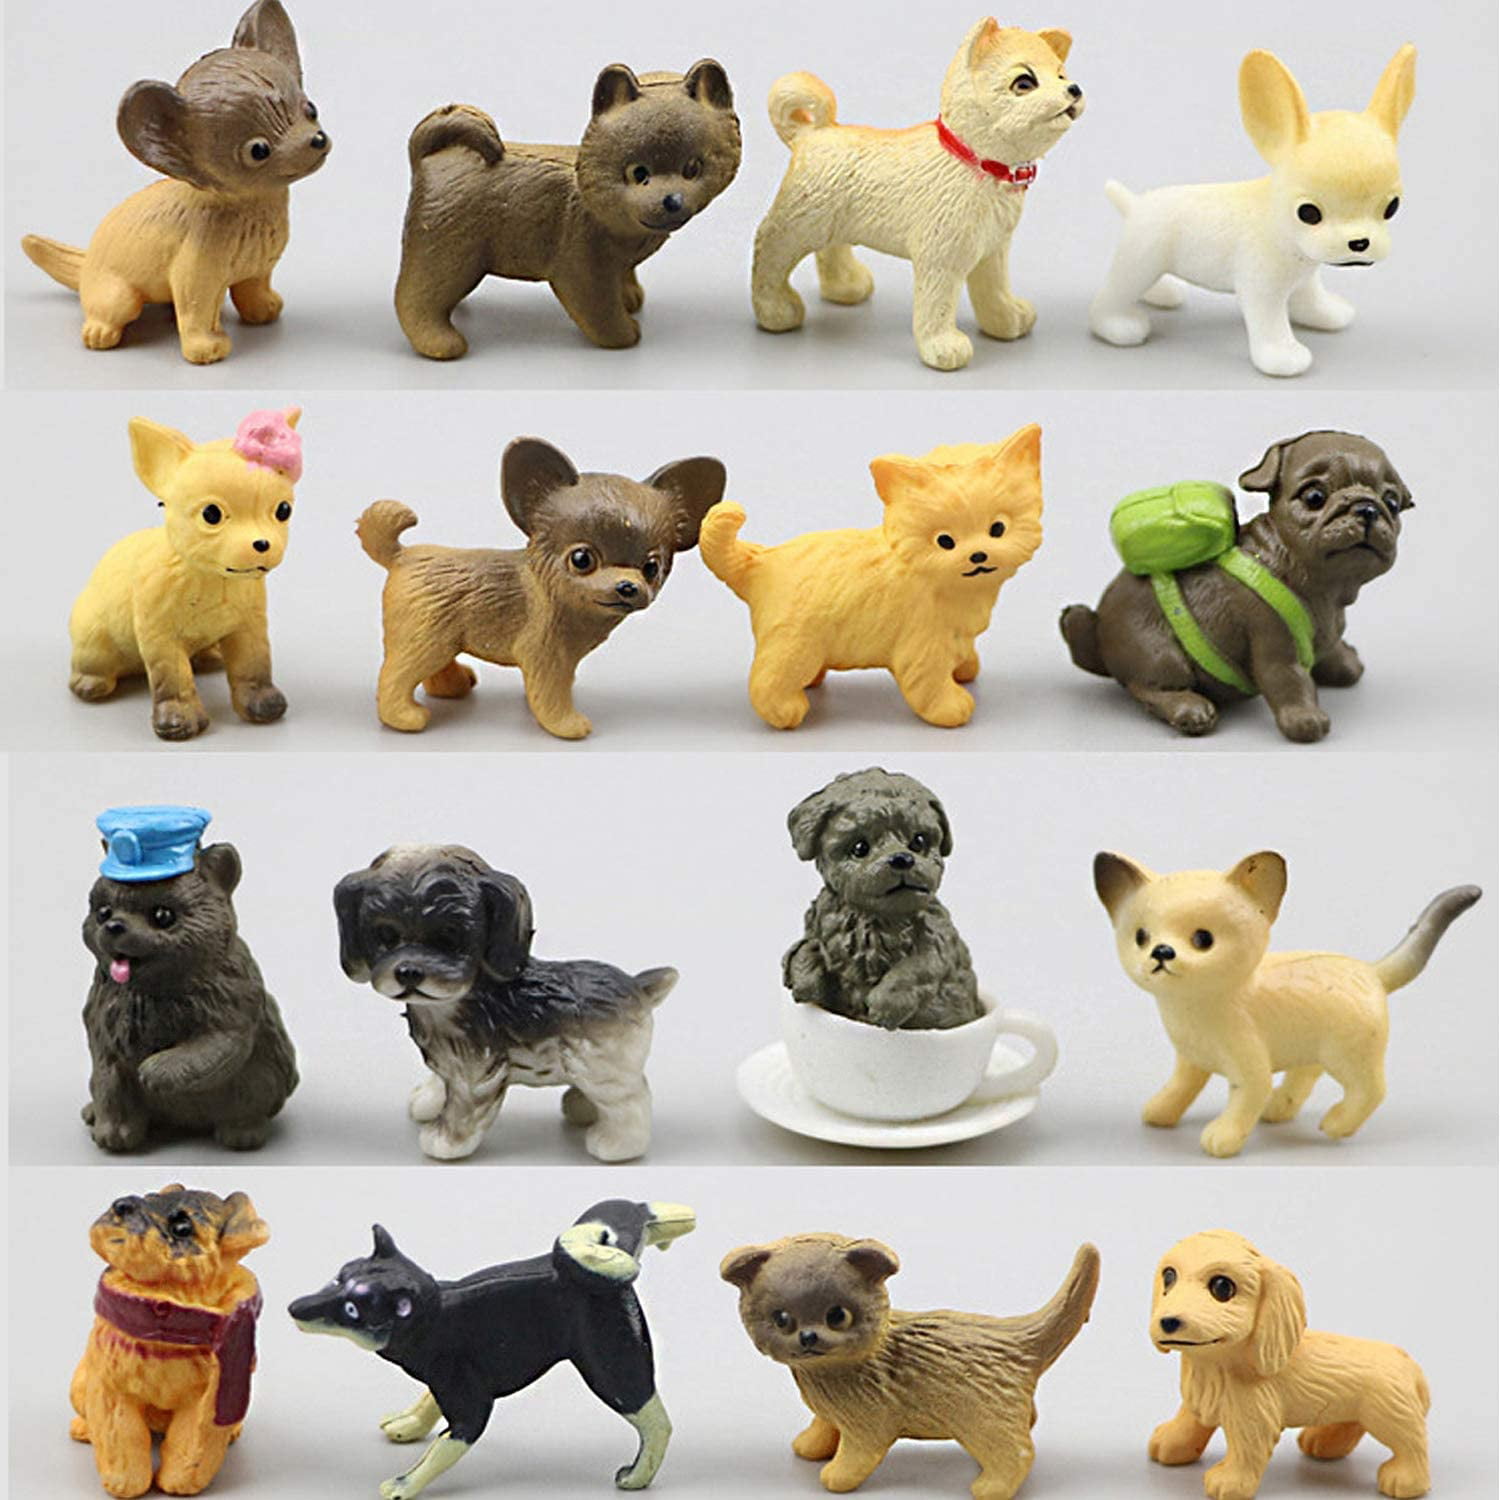 The Wagadoodle Dogs, Small Animal Figurines